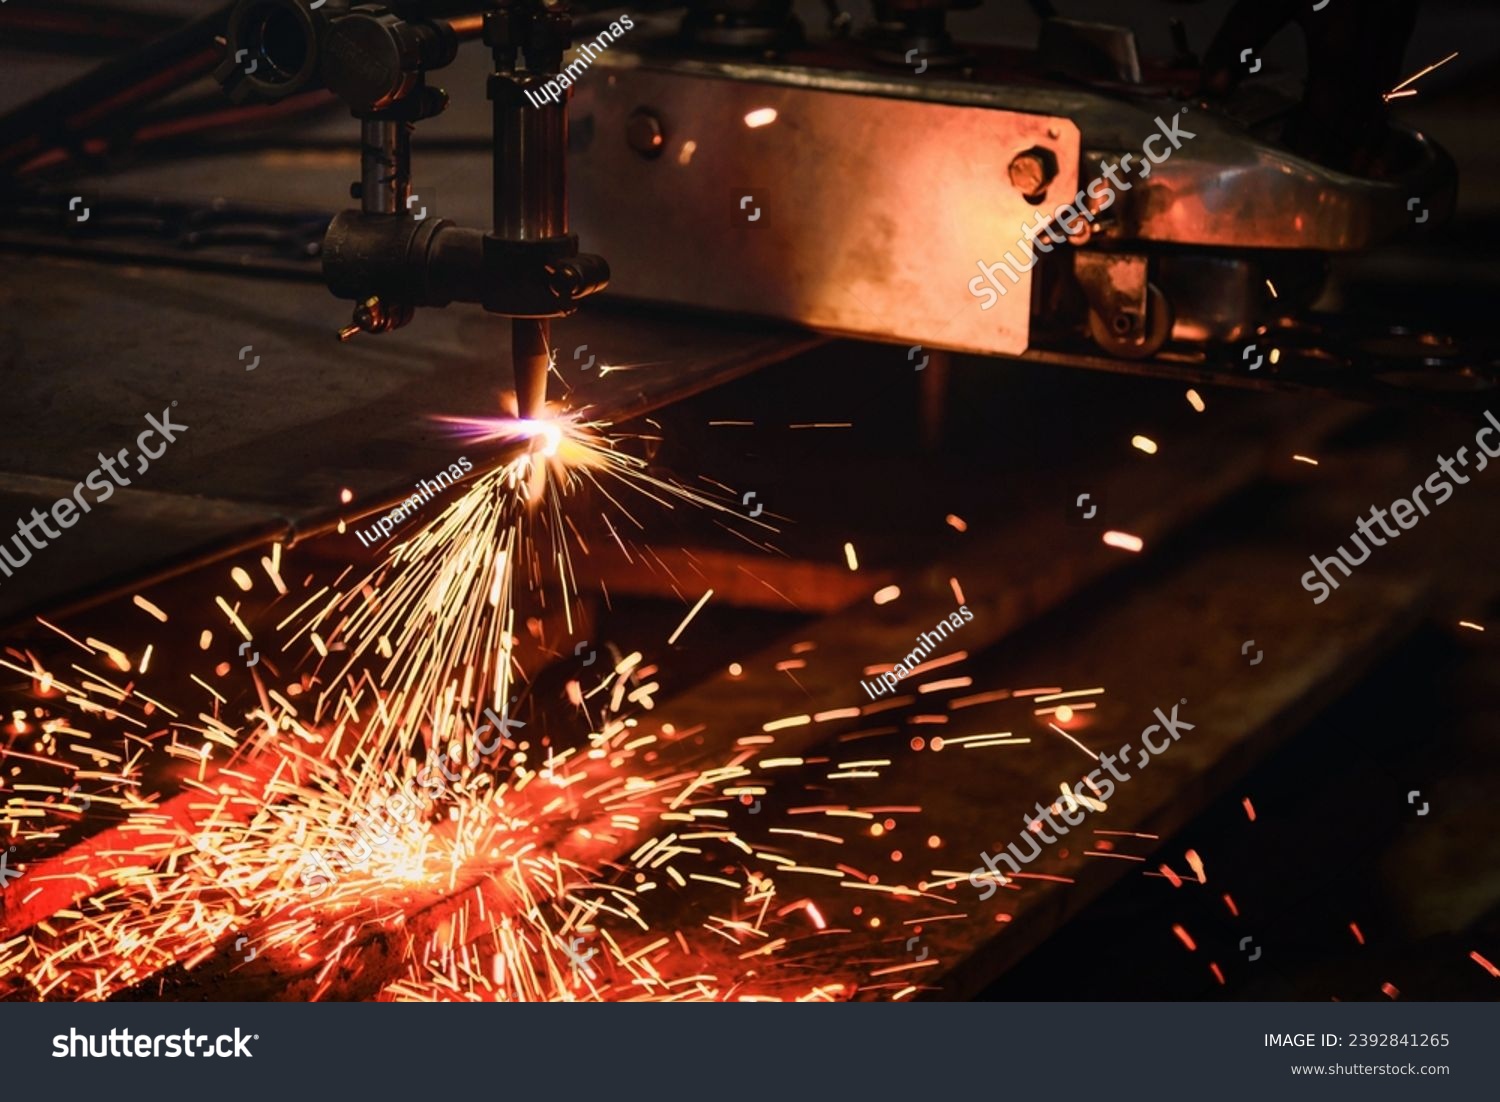 Worker cutting steel plate with acetylene welding cutting torch and bright sparks in steel industry. #2392841265